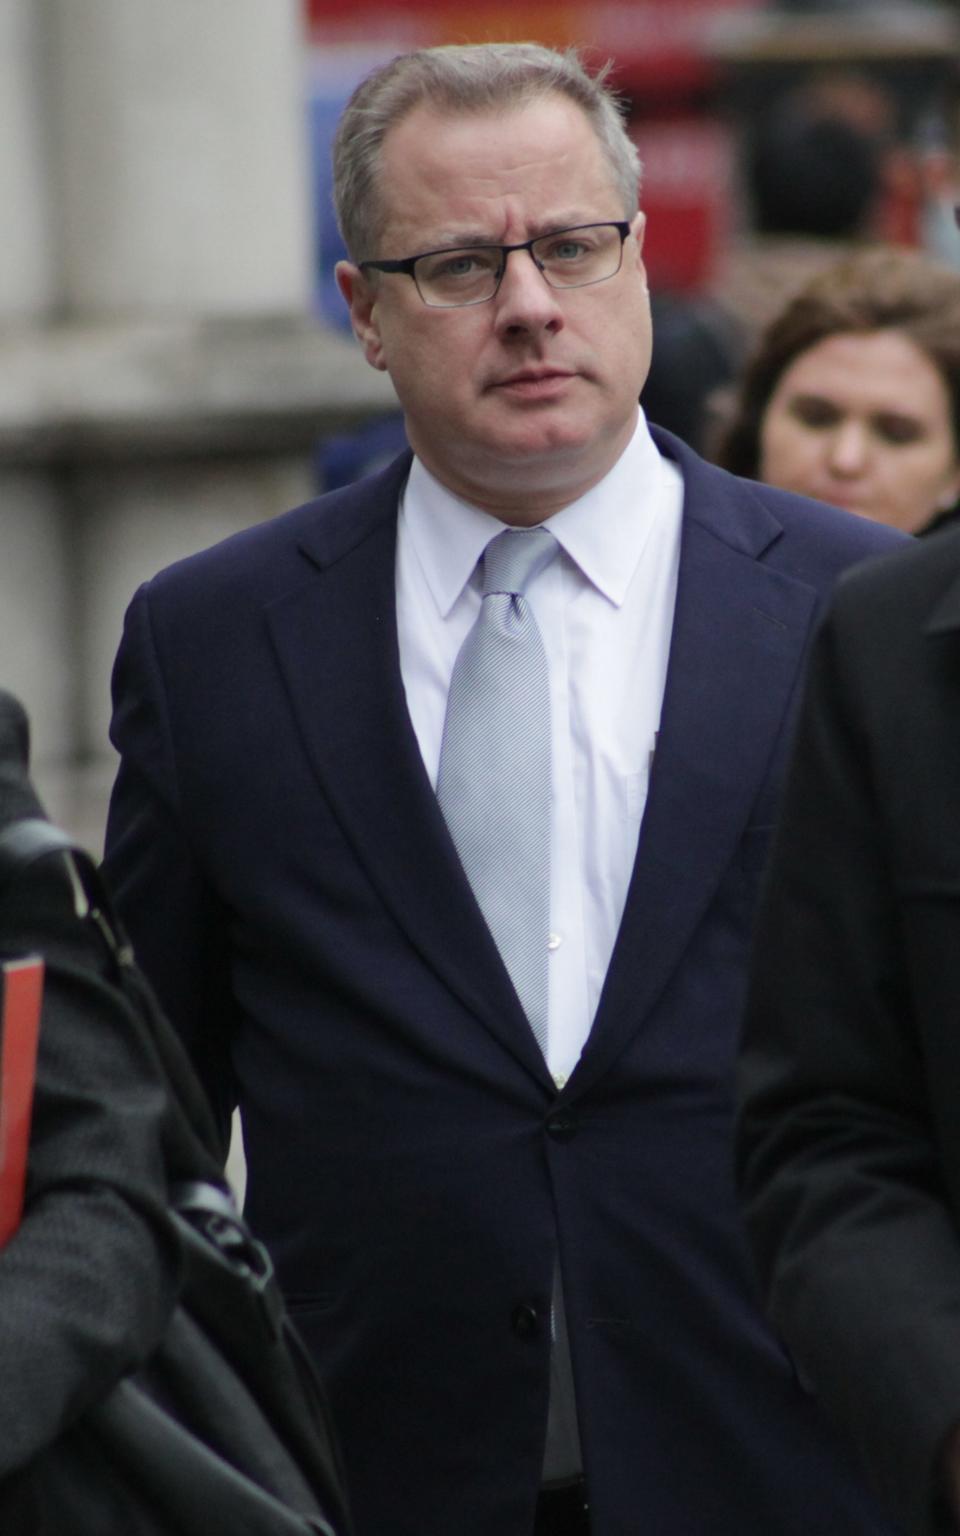 Andrew McSpadden outside Central London County Court - Credit: Paul Keogh